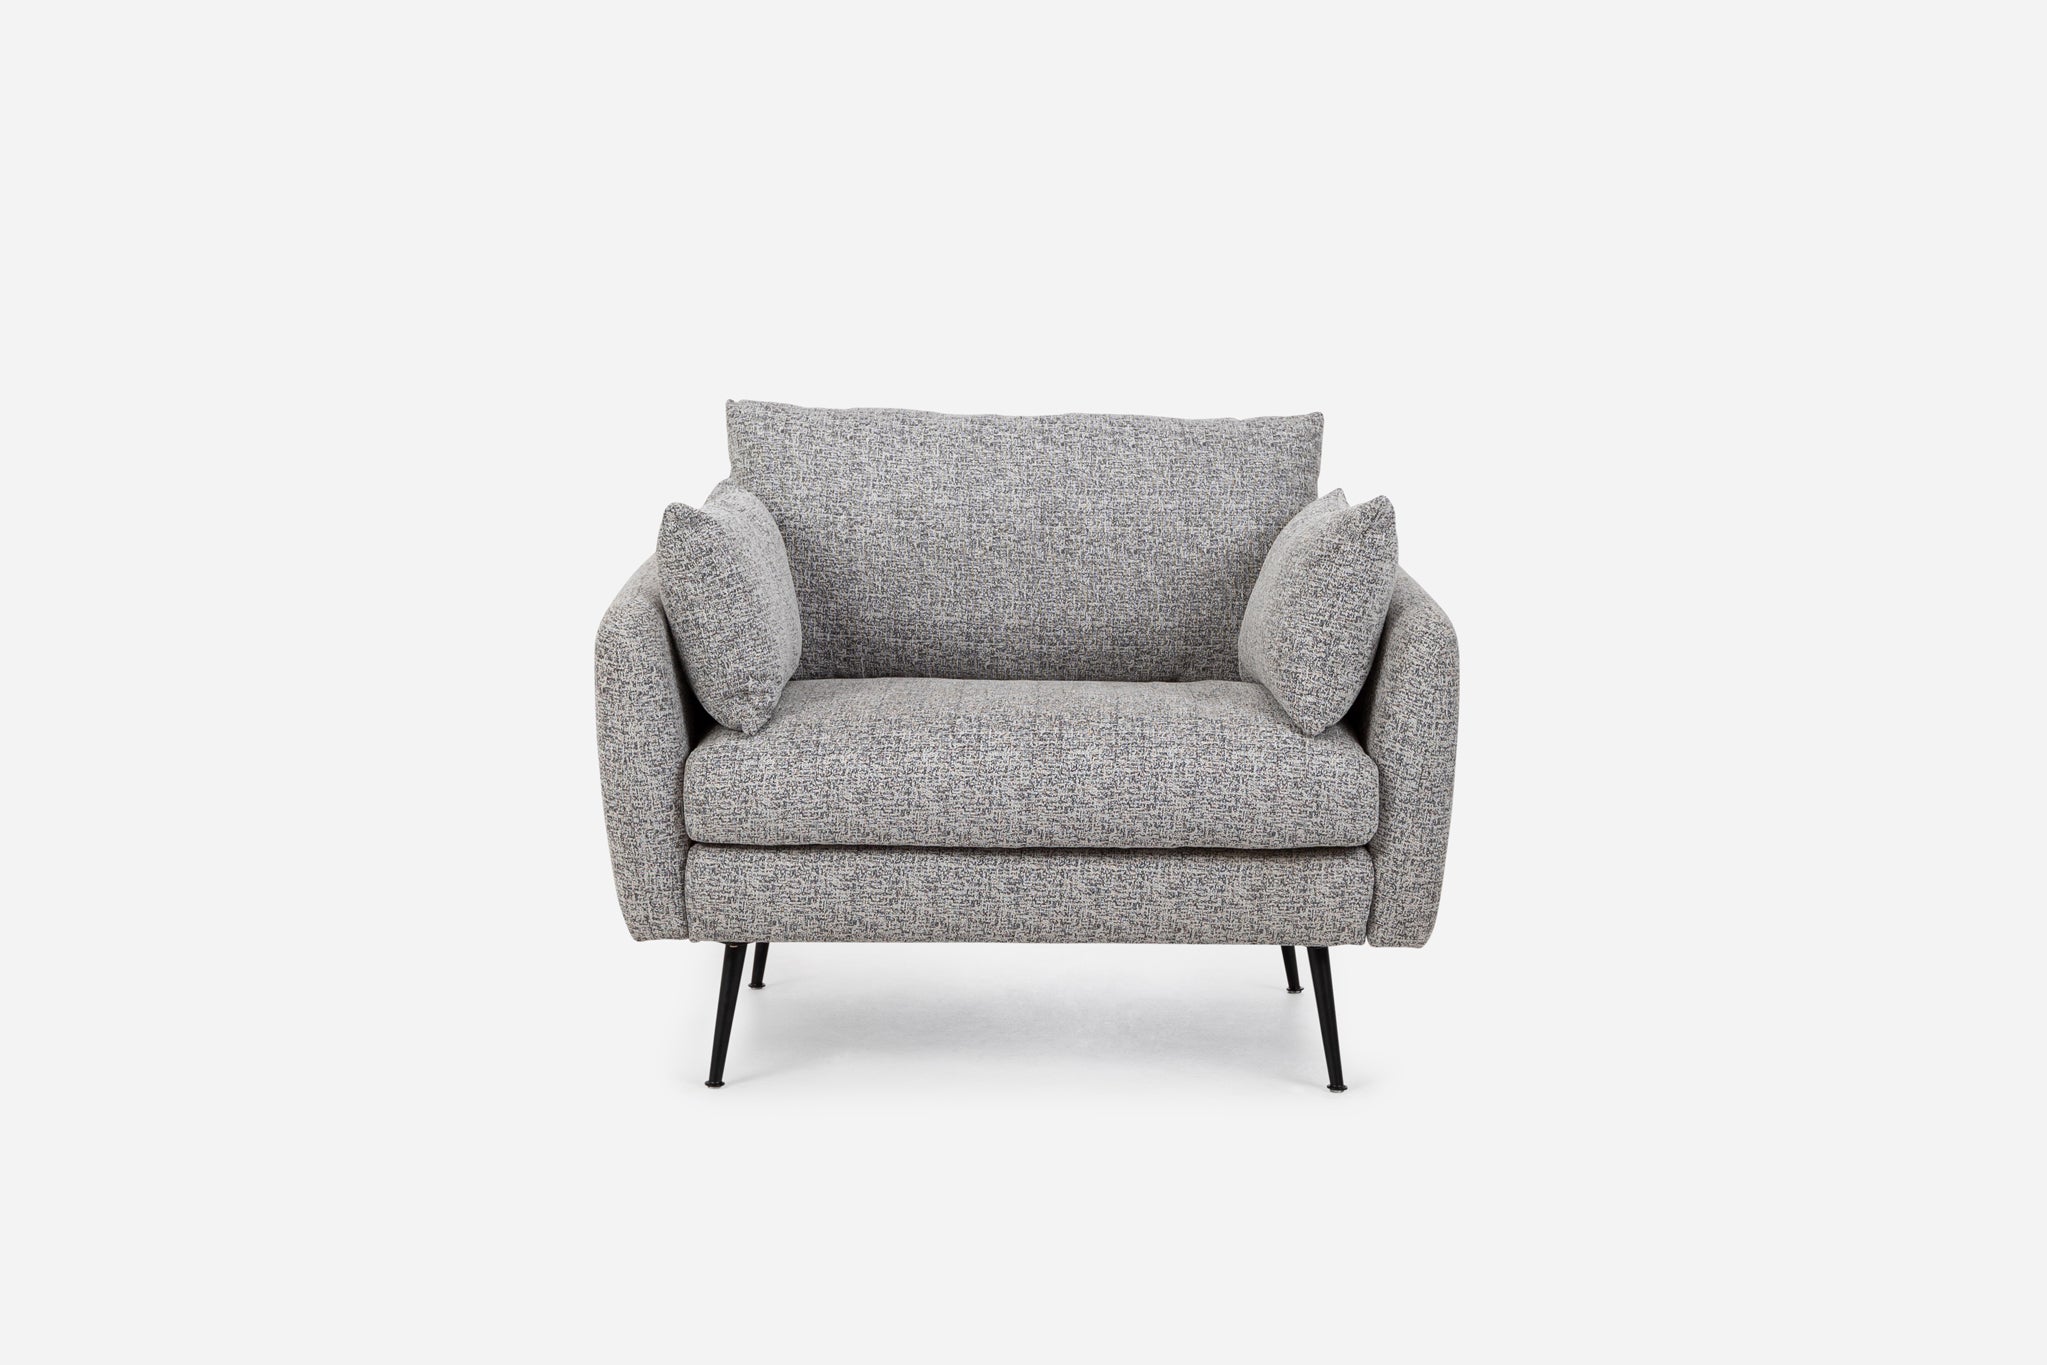 park armchair shown in grey fabric with black legs